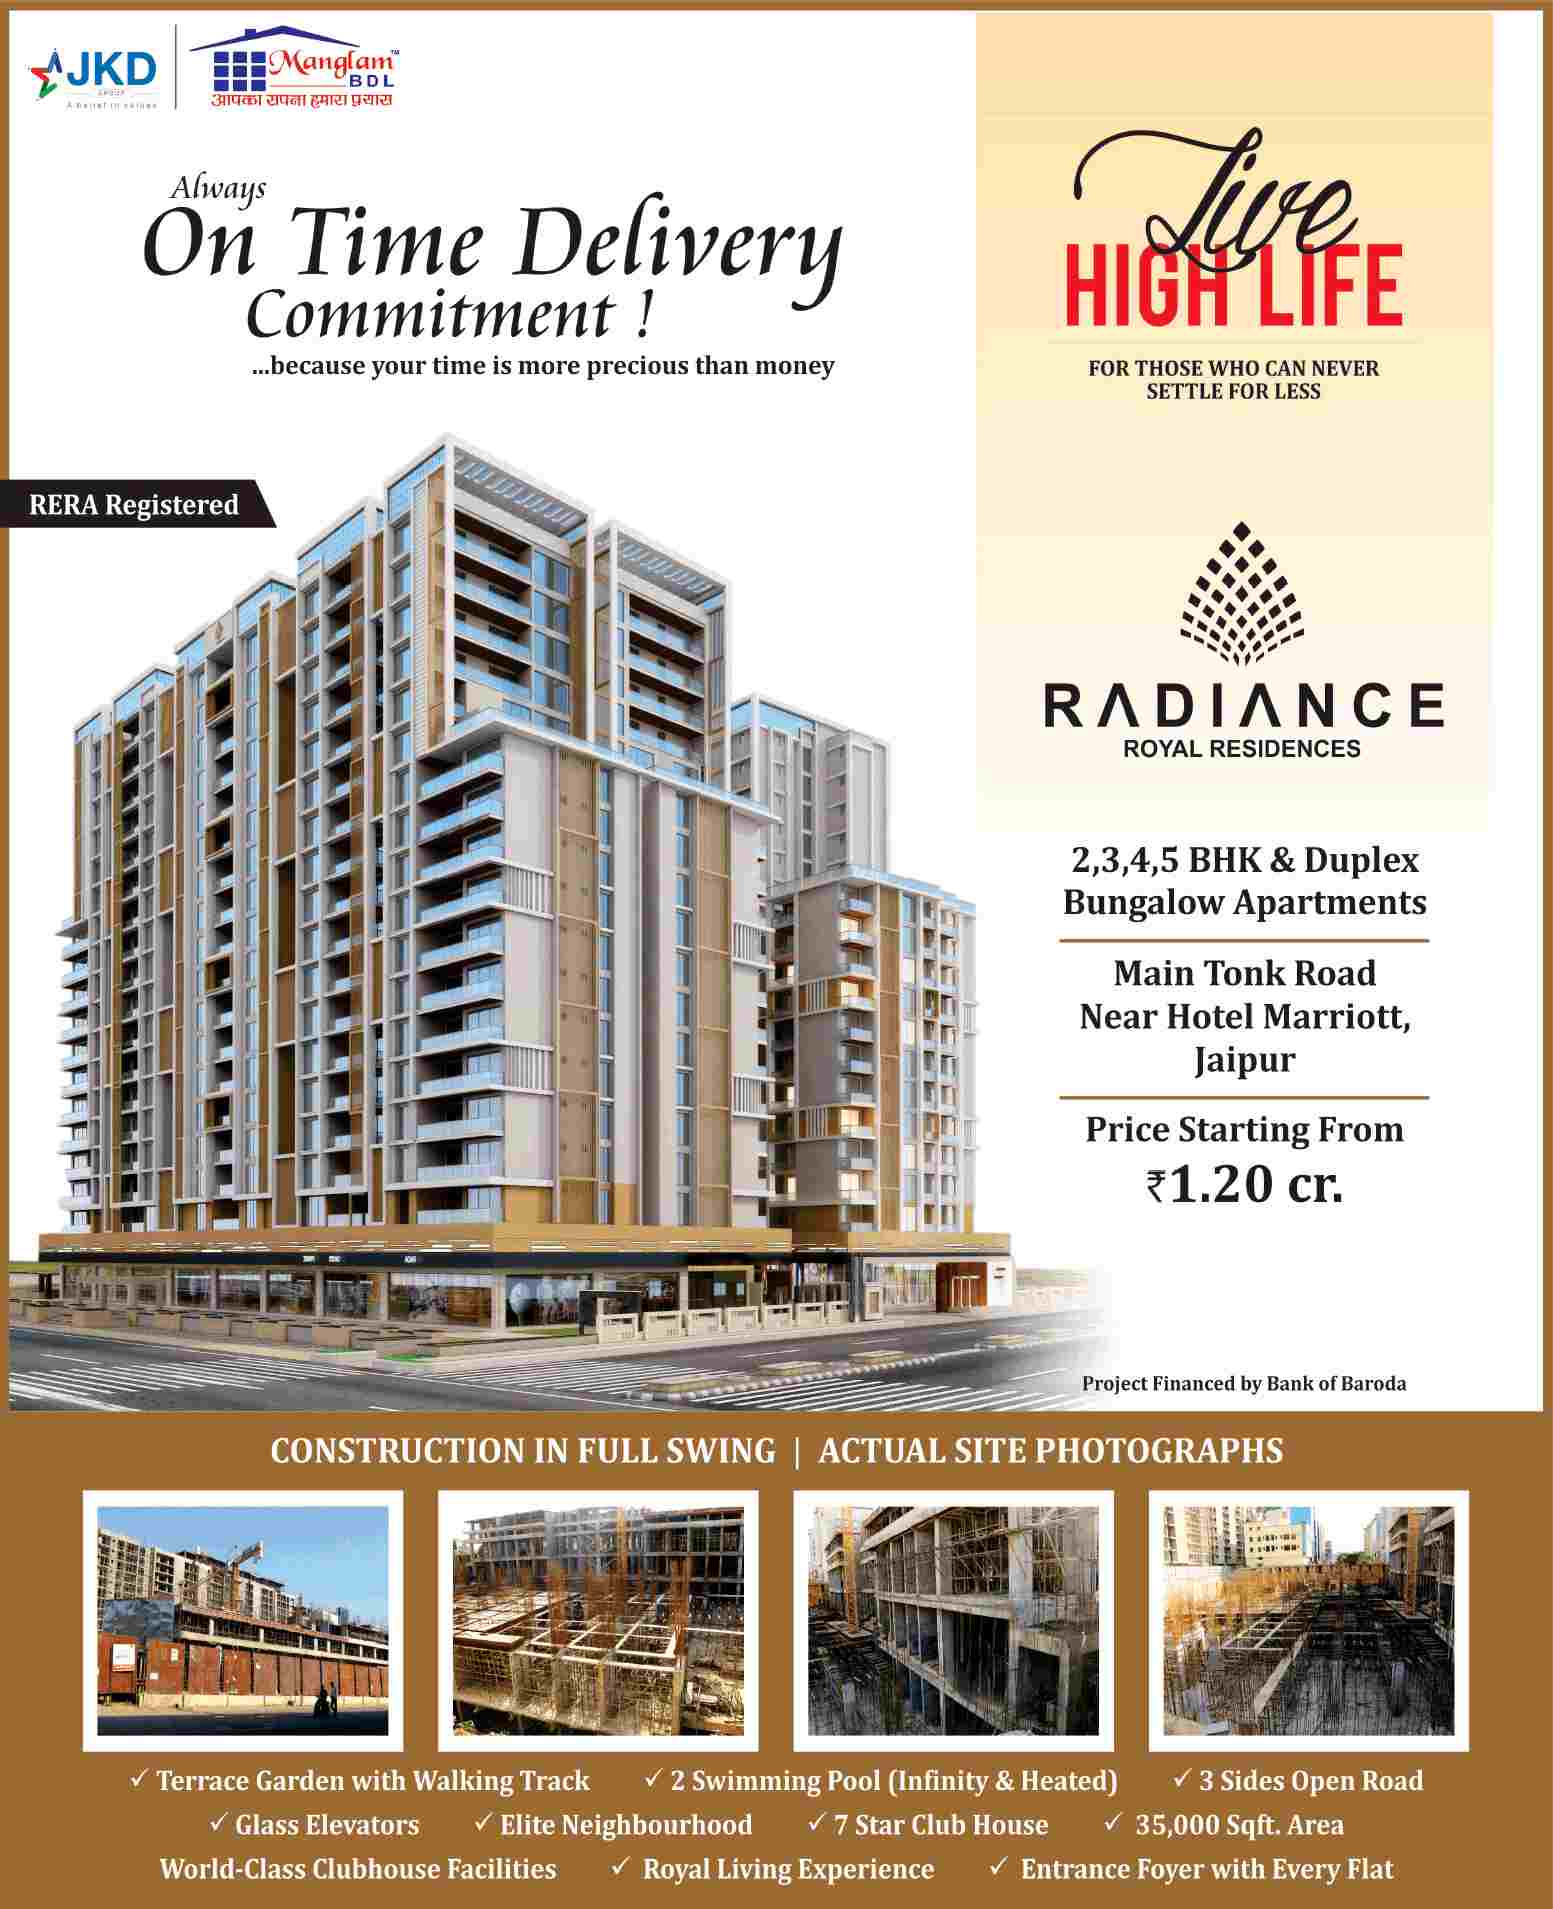 High life for those who can never settle for less at Manglam Radiance in Jaipur Update